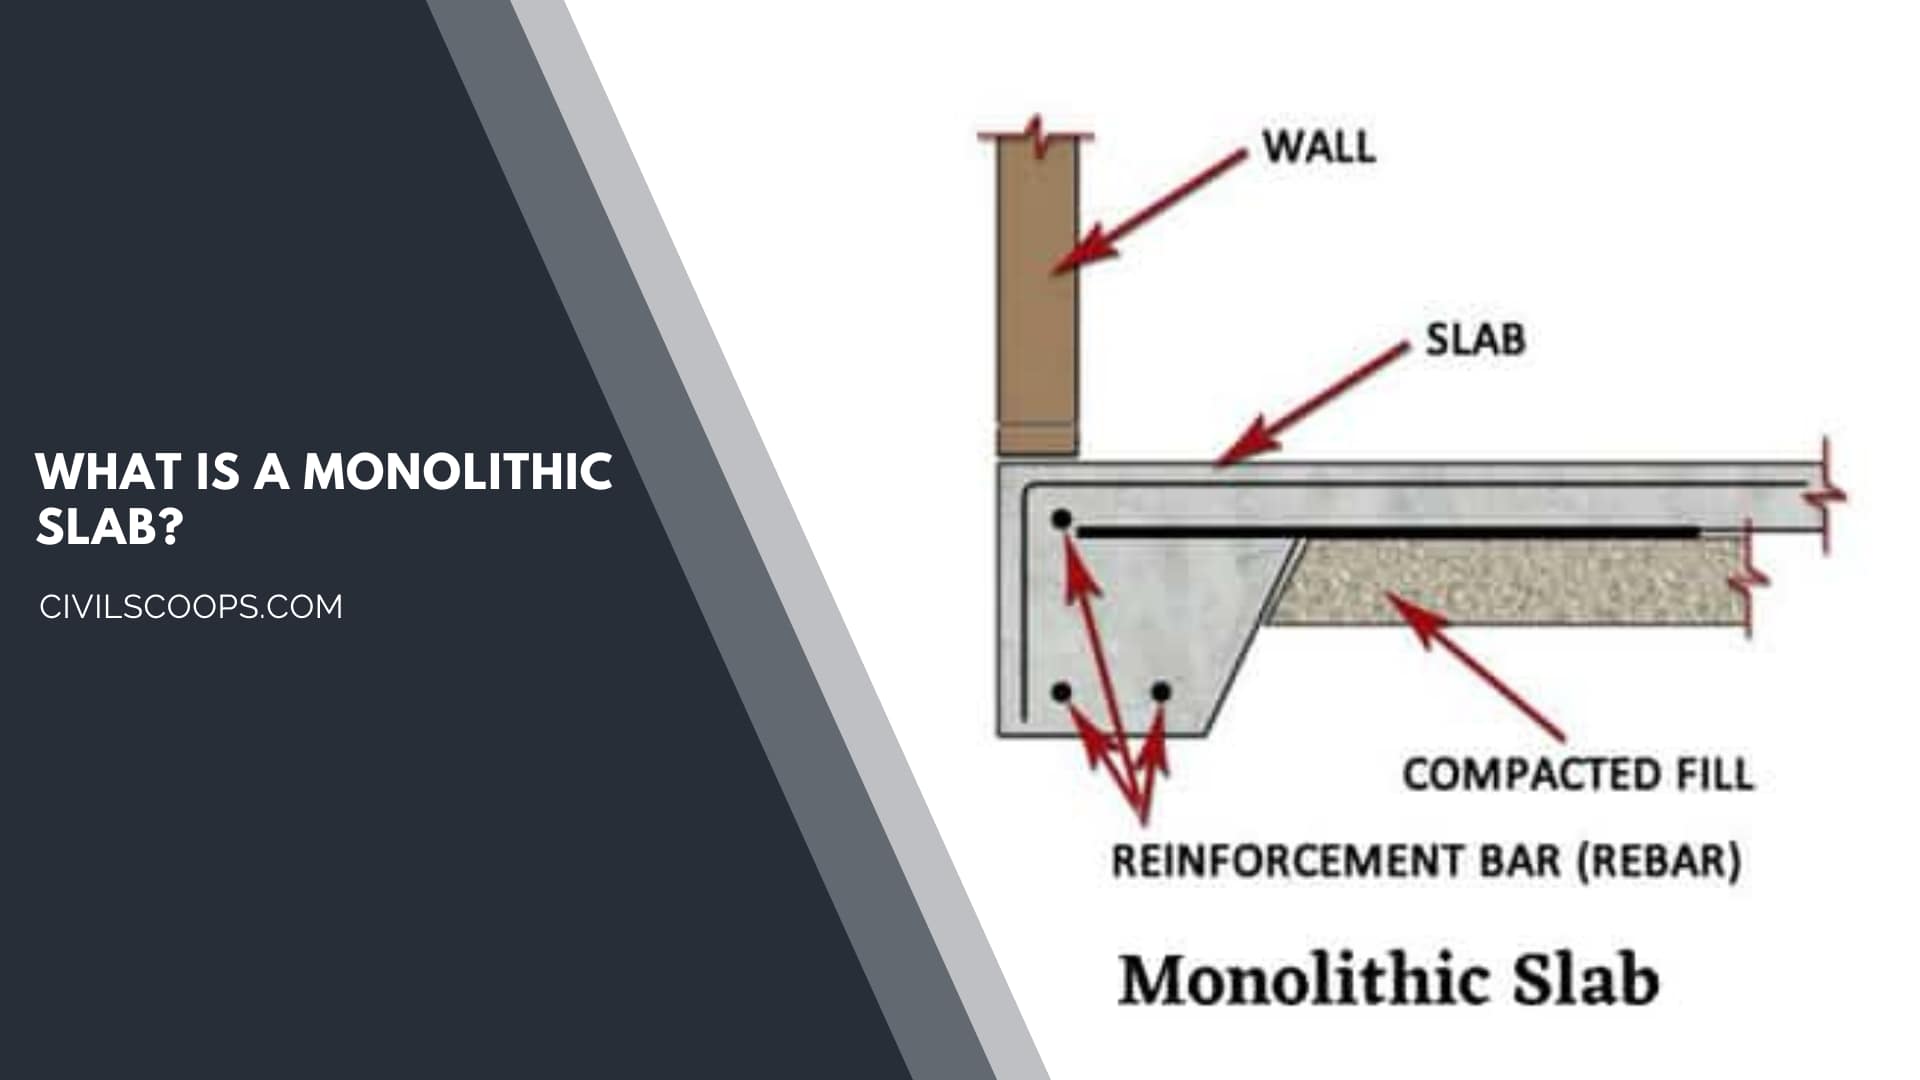 What Is a Monolithic Slab